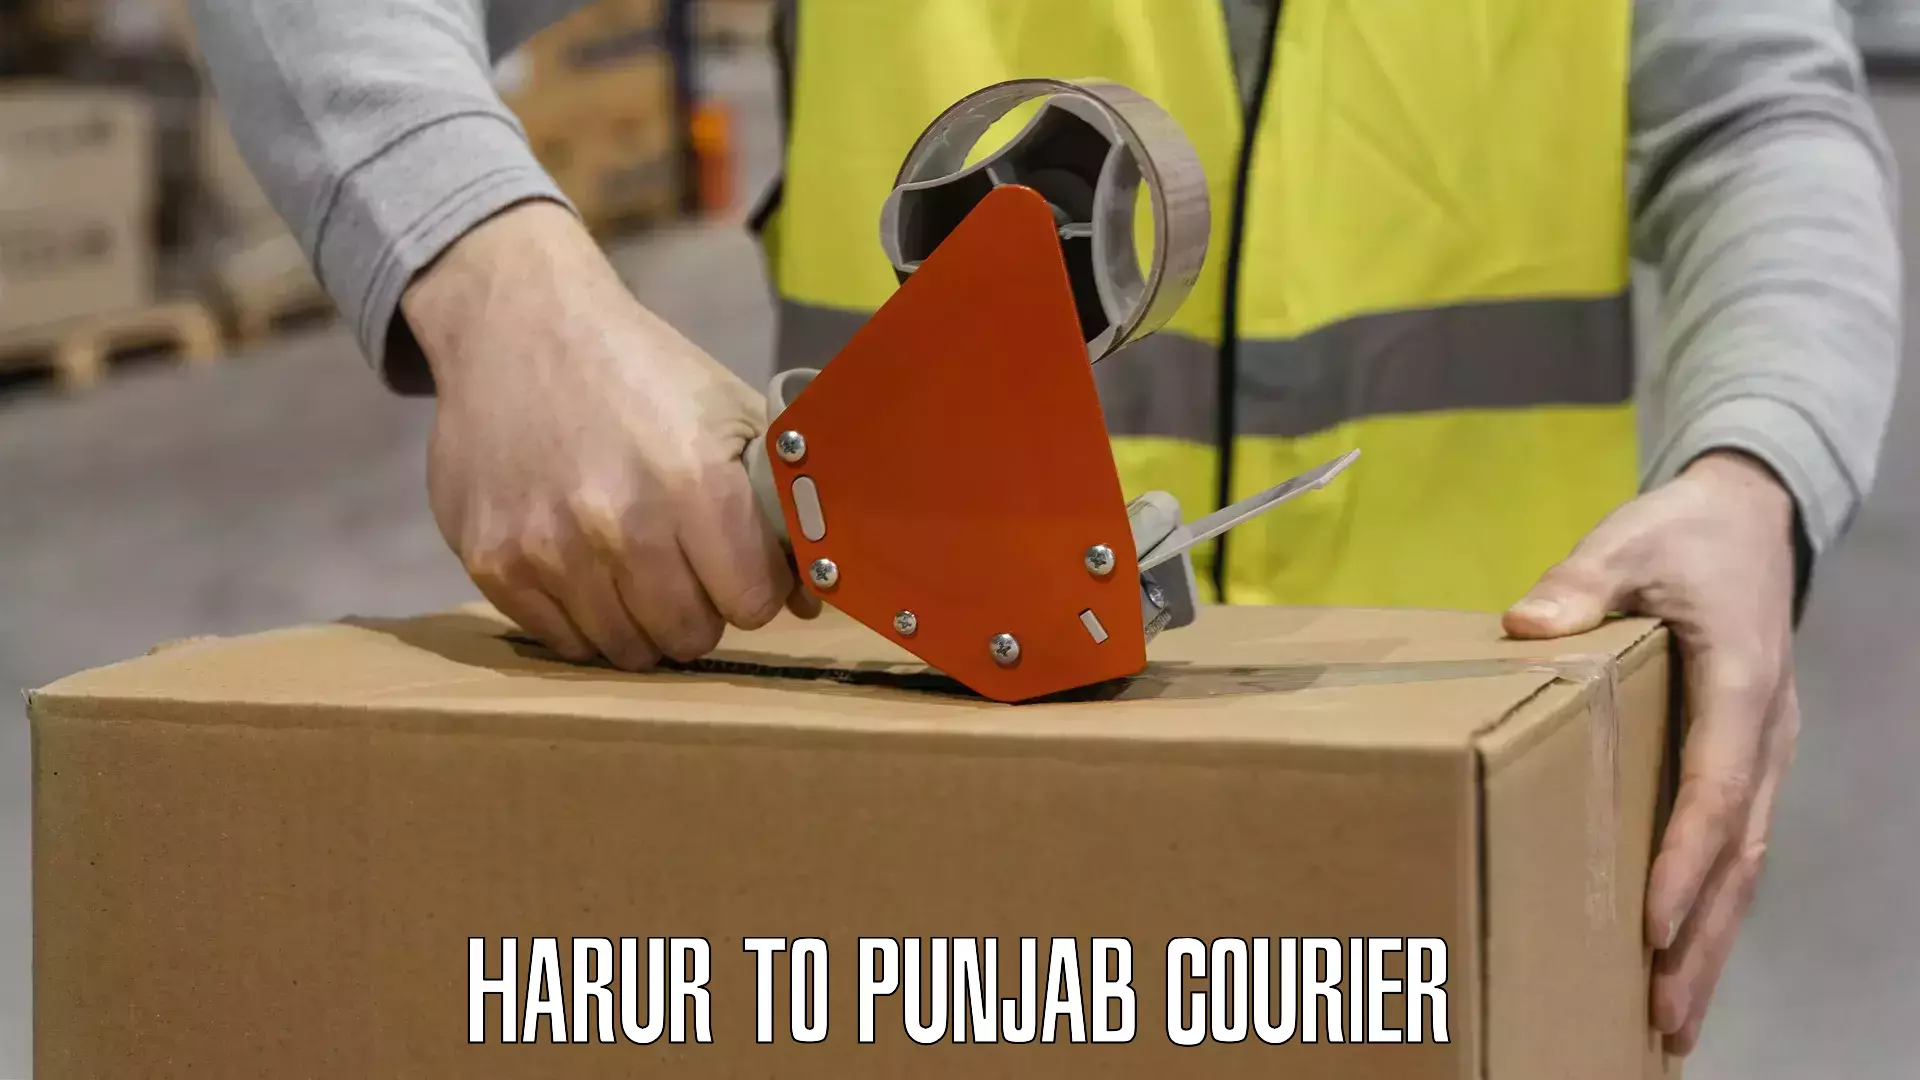 Domestic courier Harur to Punjab